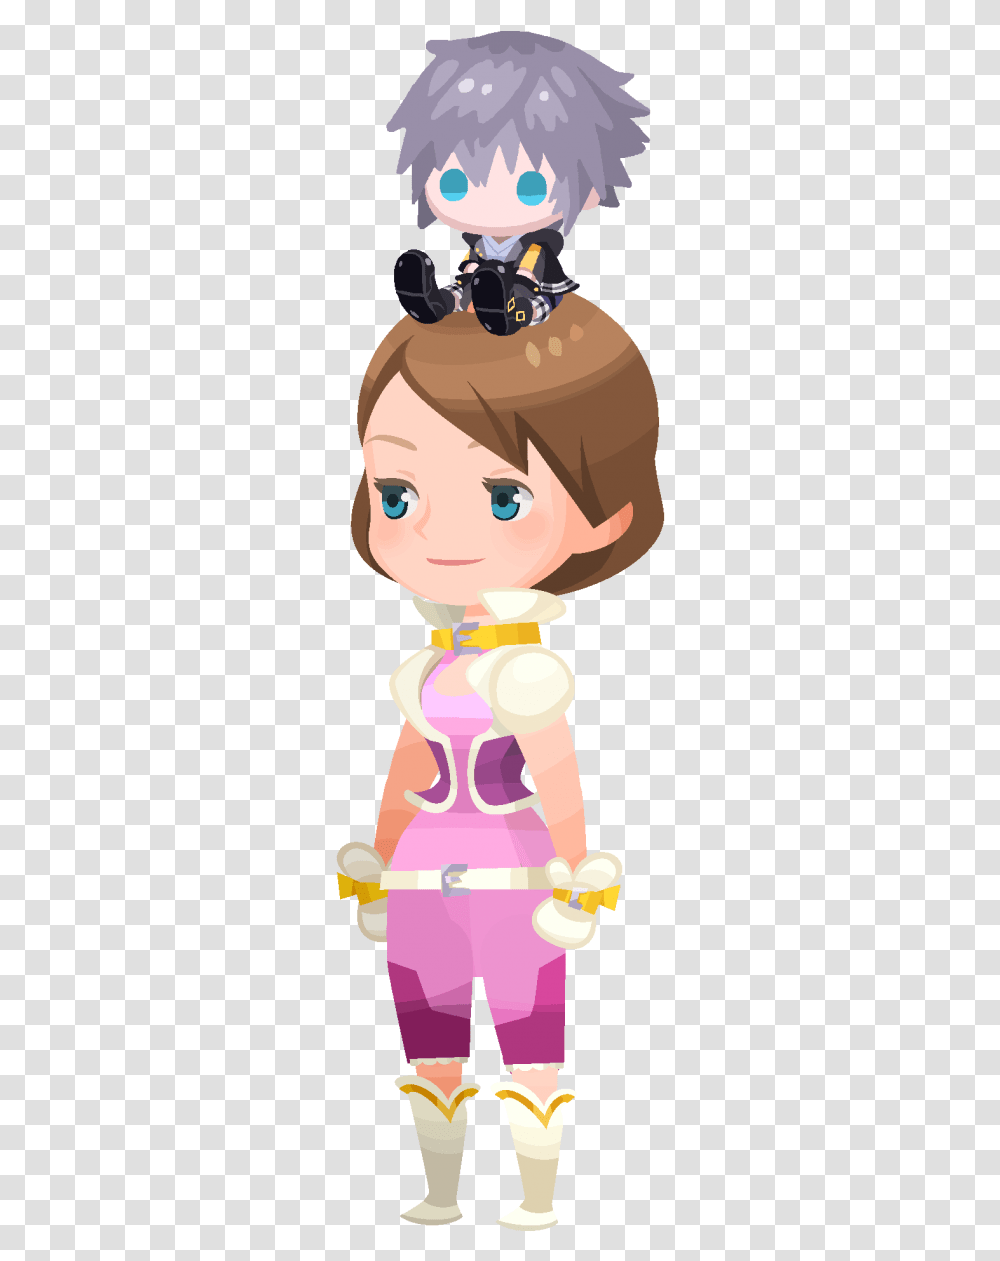 Kingdom Hearts Union X Avatar Outfits, Doll, Toy, Figurine, Person Transparent Png